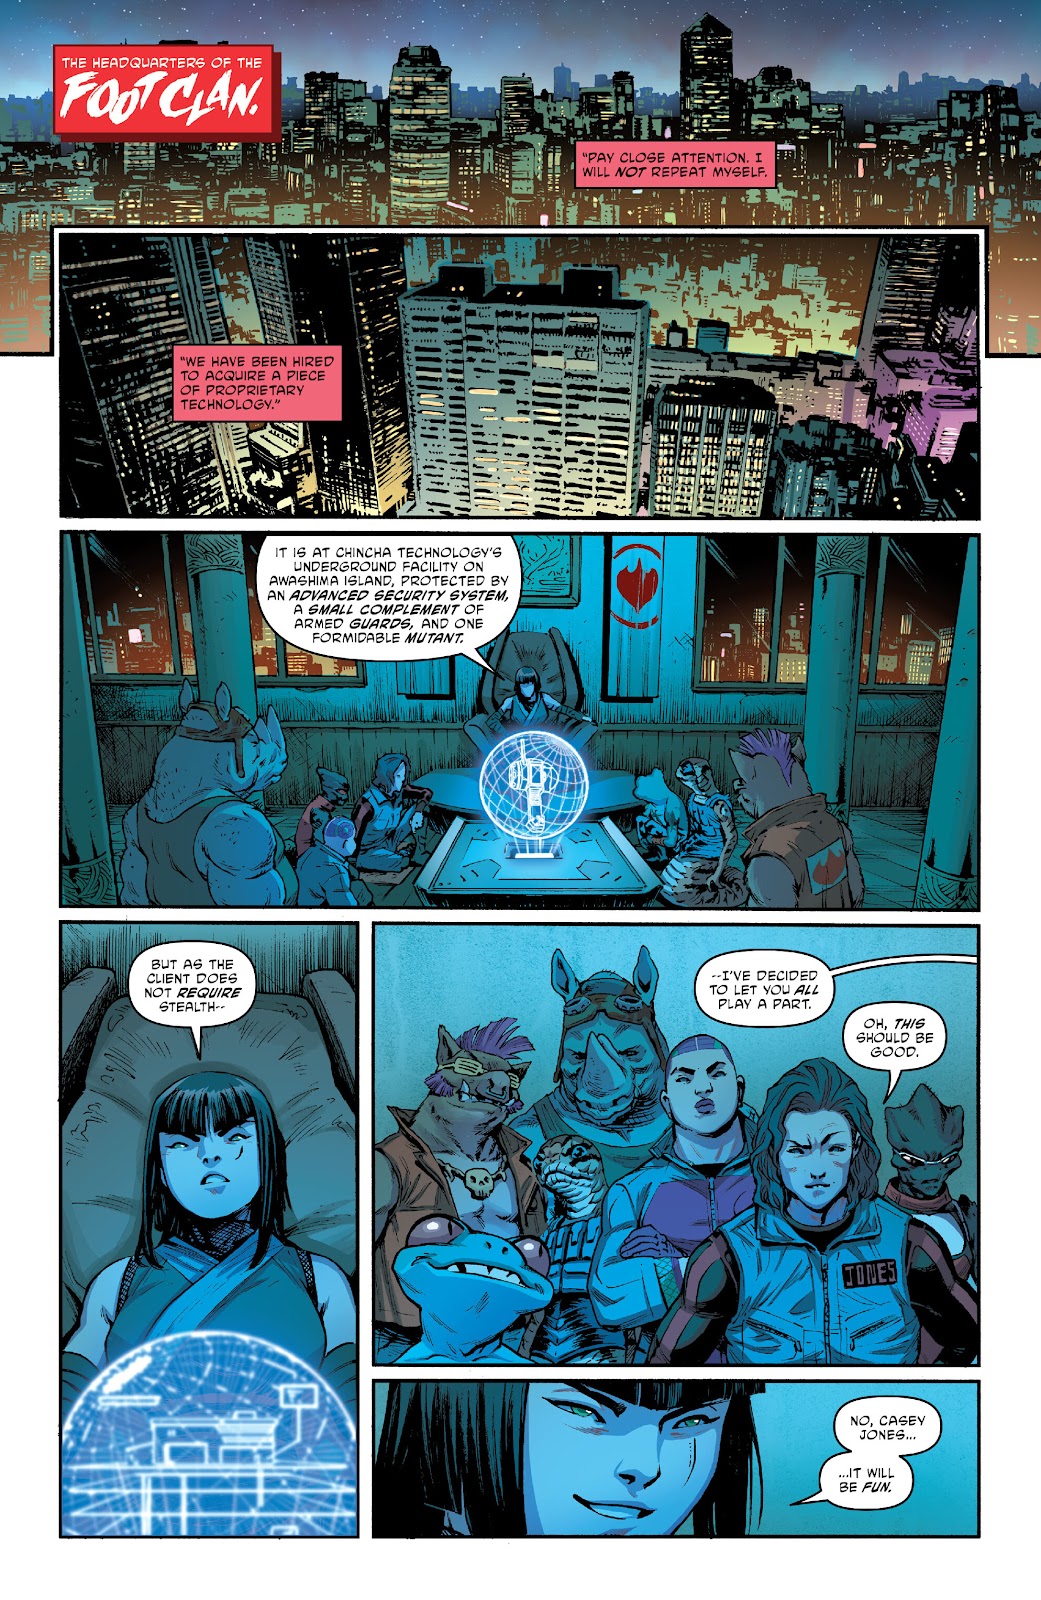 Teenage Mutant Ninja Turtles: The Untold Destiny of the Foot Clan issue 1 - Page 3